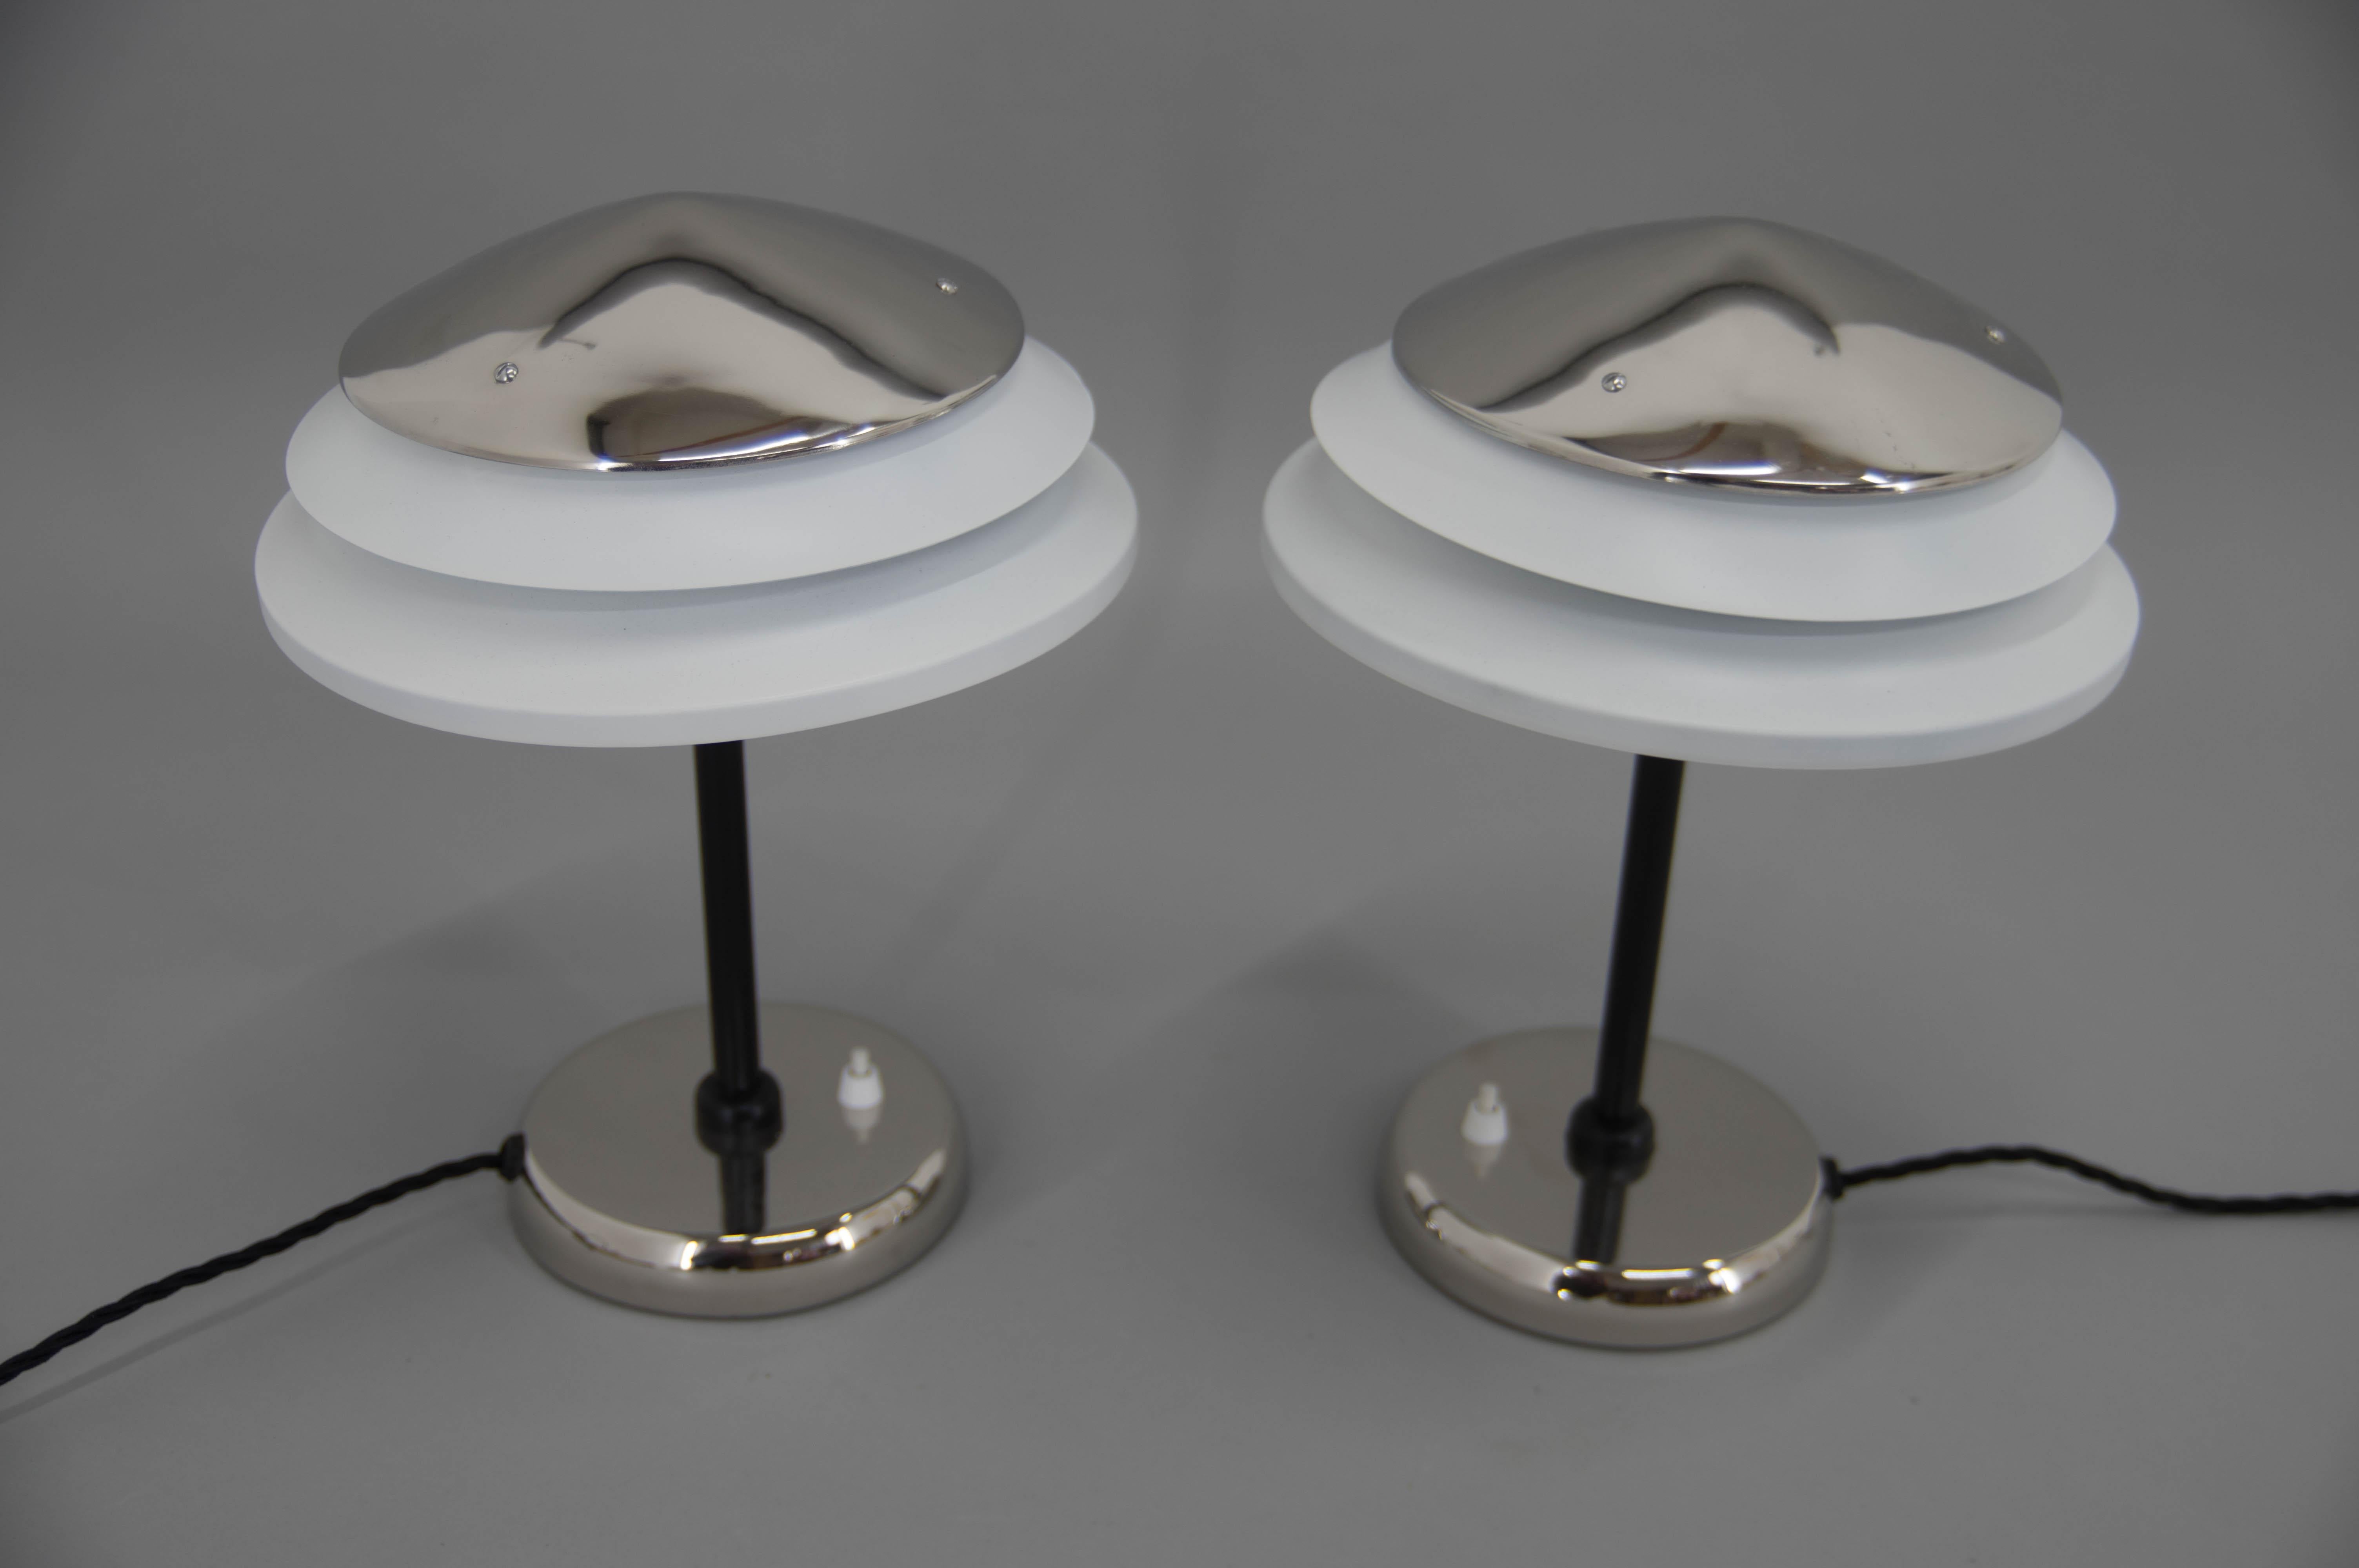 Restored set of two table lamps made by ZUKOV in 1950s.
New nickel-plating and new black and white paint.
Rewired:
1x40W, E25-E27 bulb
US plug adapter included.